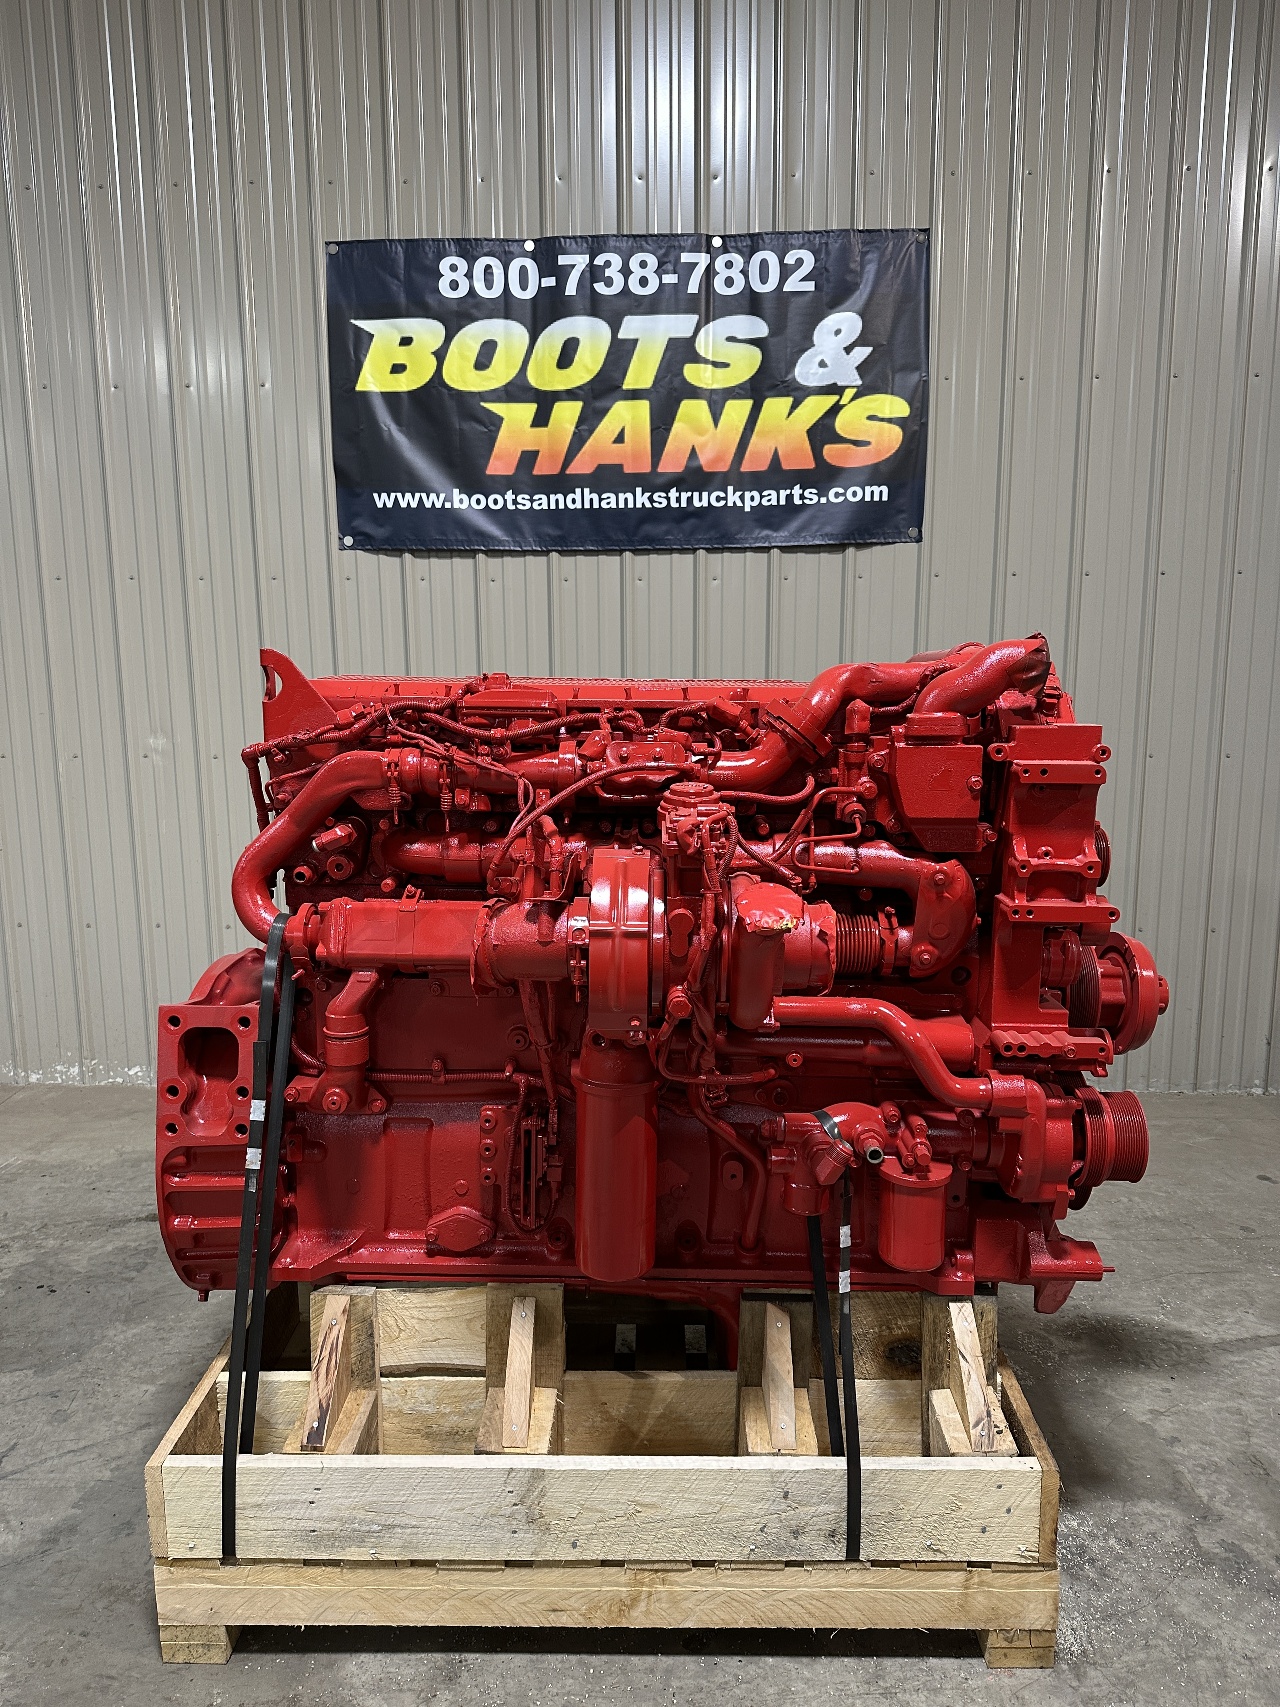 USED 2014 CUMMINS ISX15 COMPLETE ENGINE TRUCK PARTS #2012